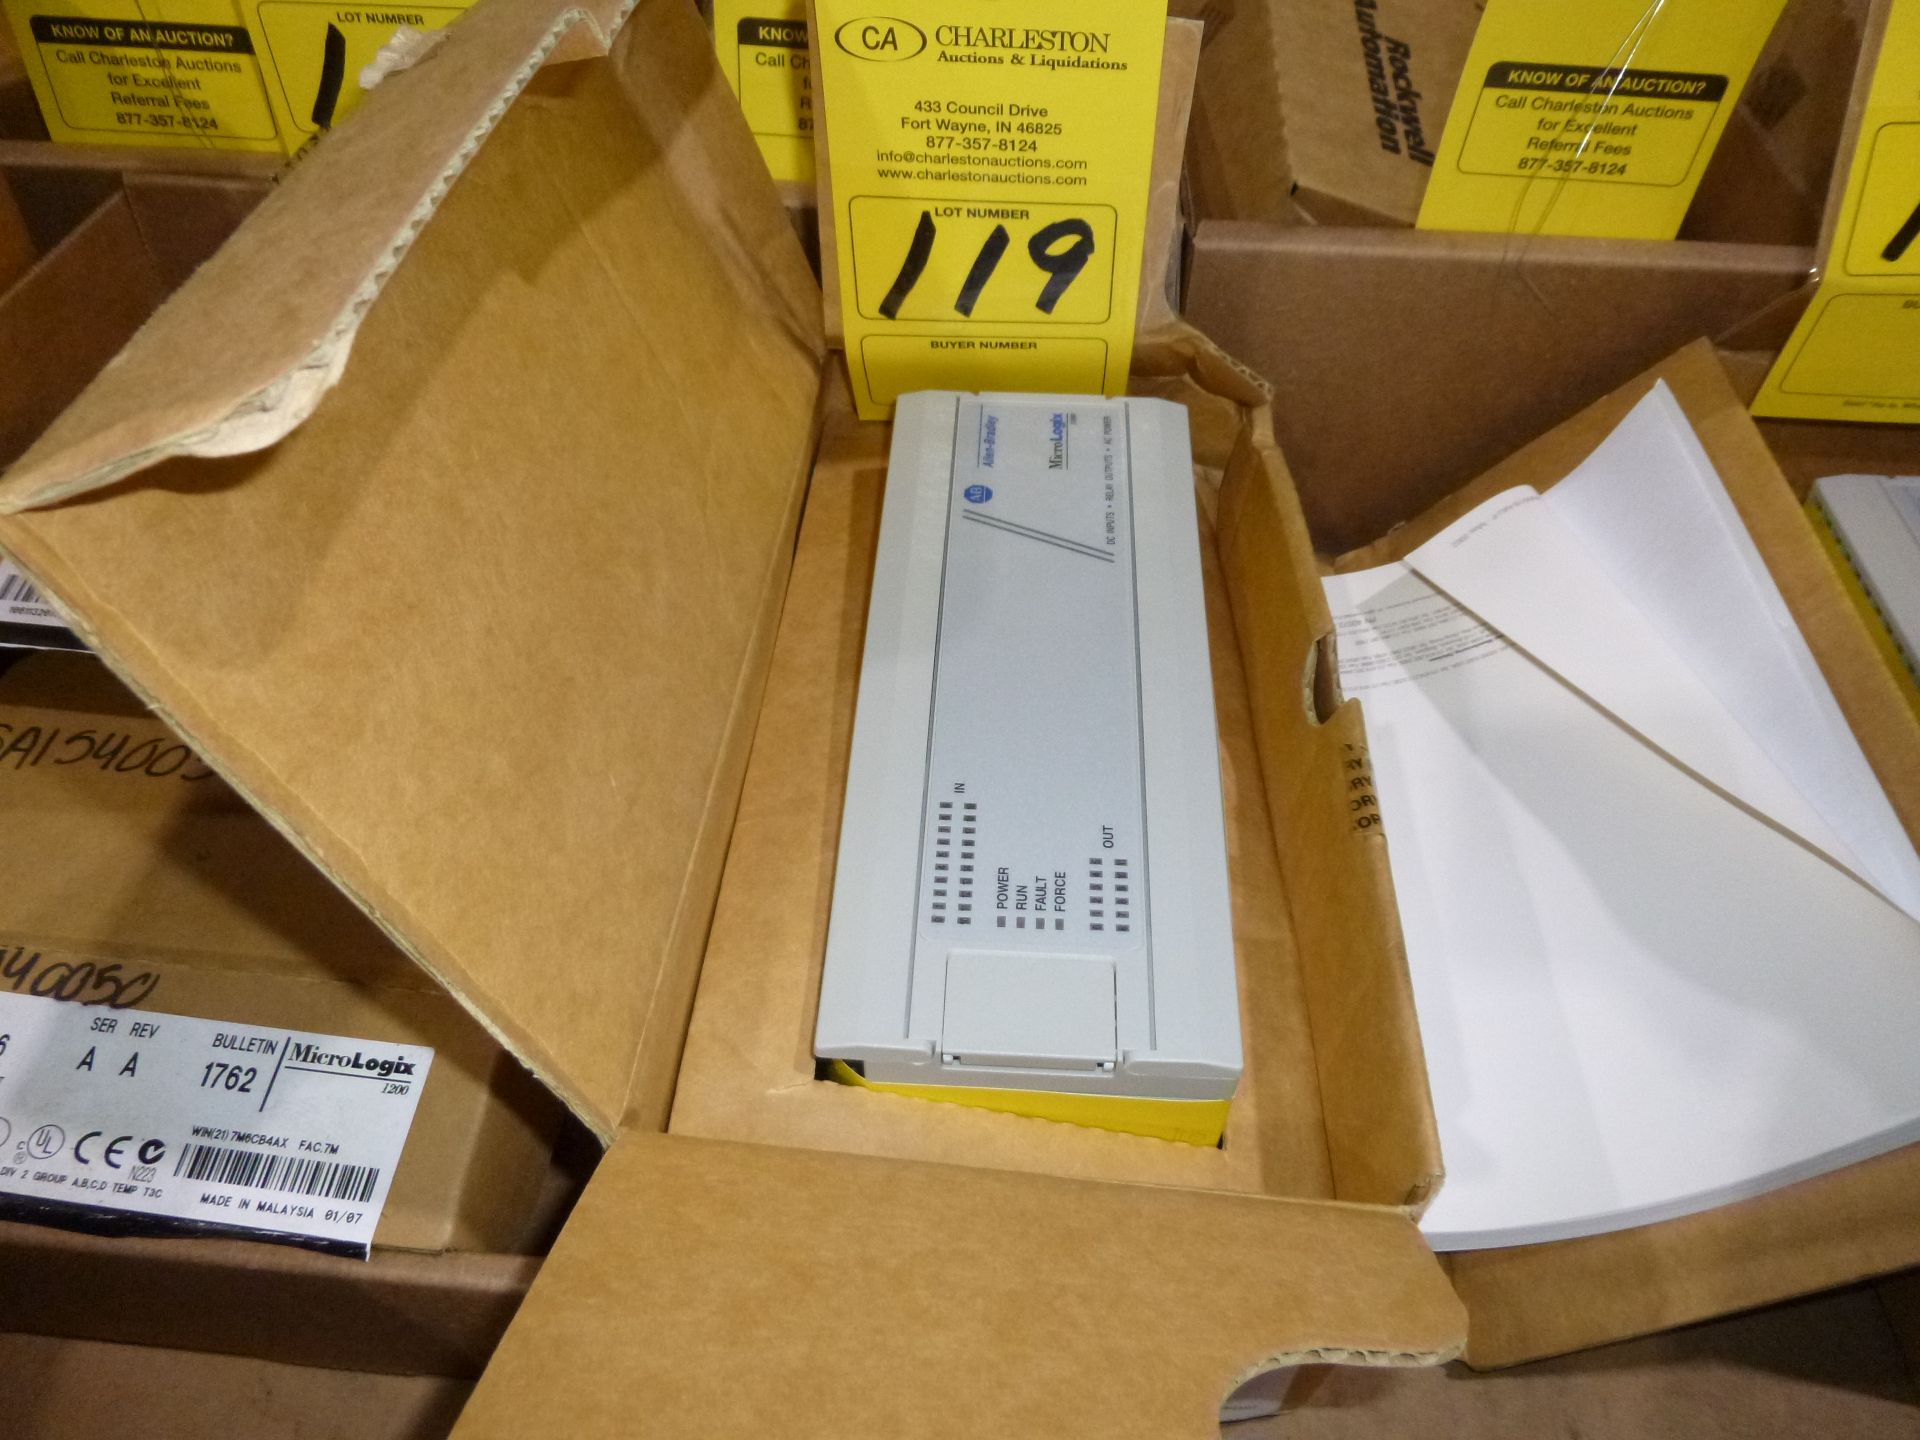 Allen Bradley Micrologix Cat 1761-L32BWA ser E, as always with Brolyn LLC auctions, all lots can